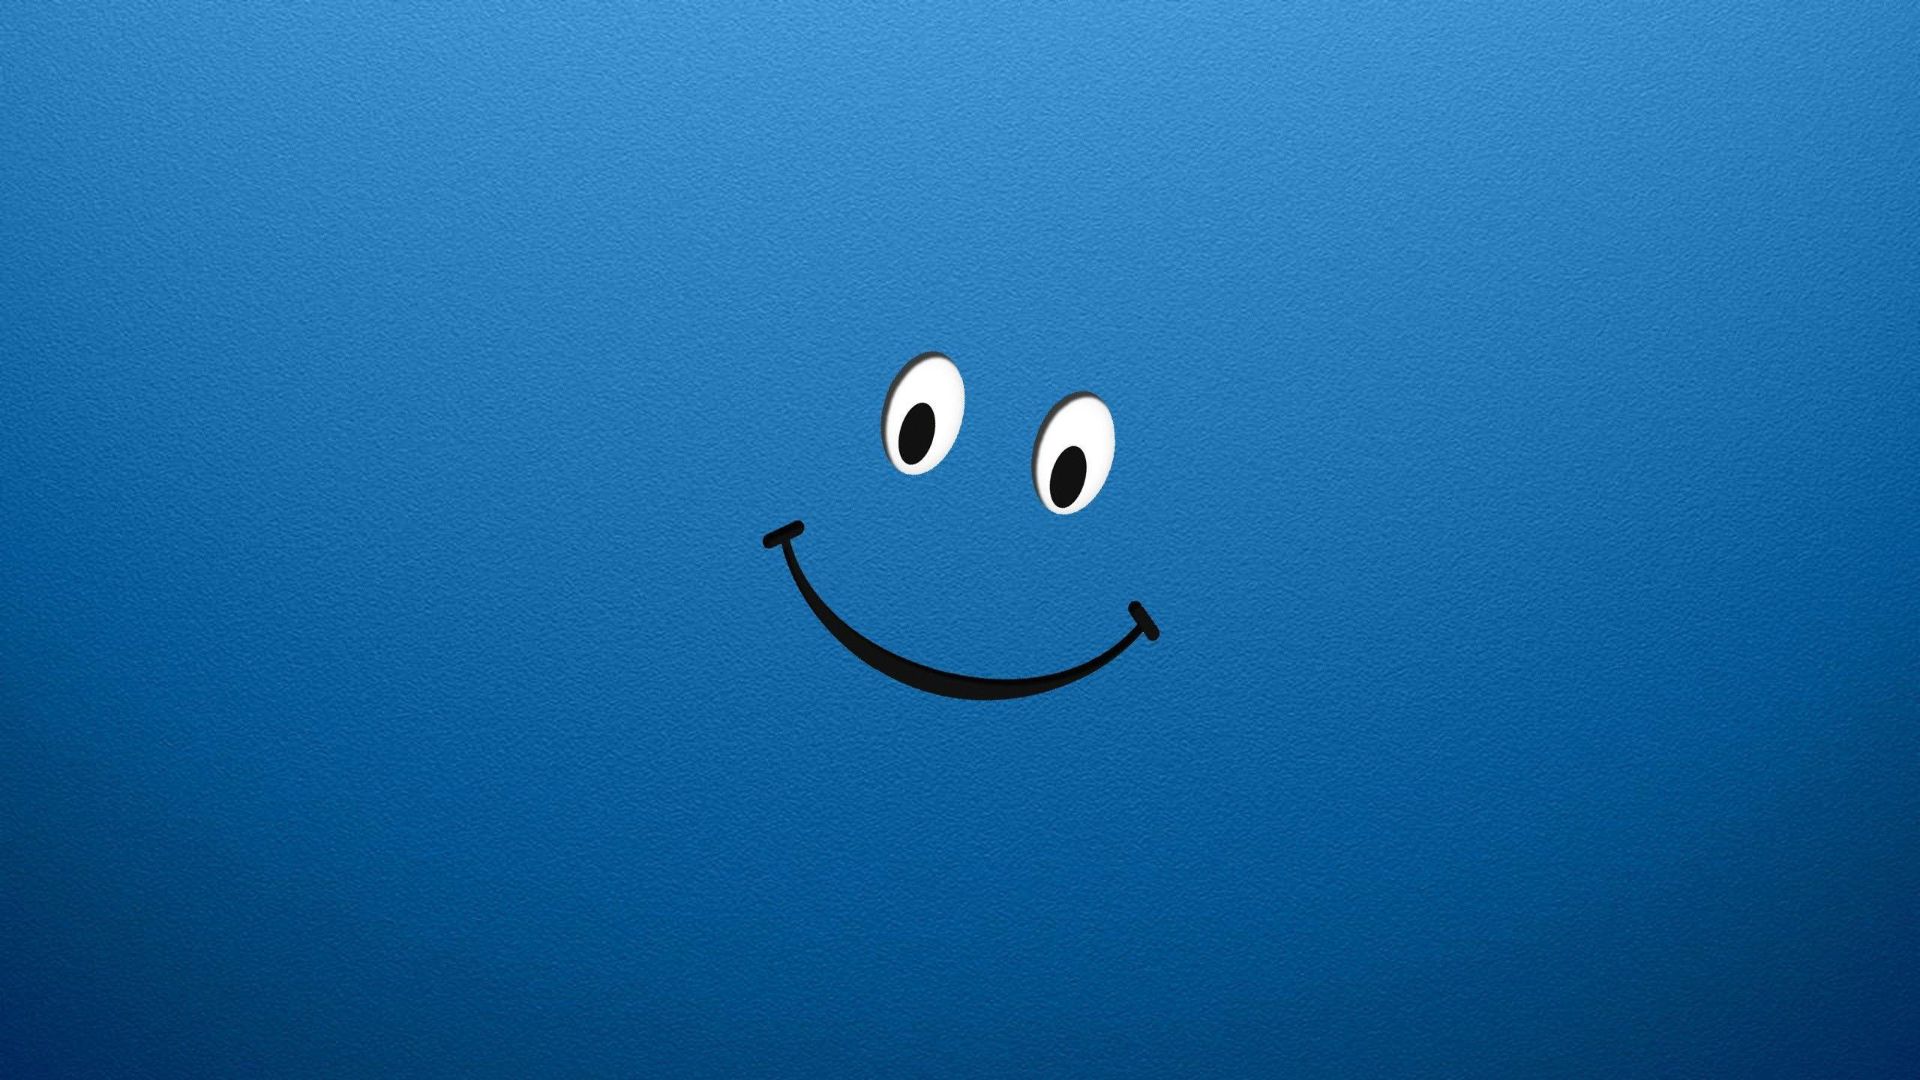 Cool Smiley Face Emoji Wallpaper Quality Cool Smiley Face Emoji Wallpaper Background Download